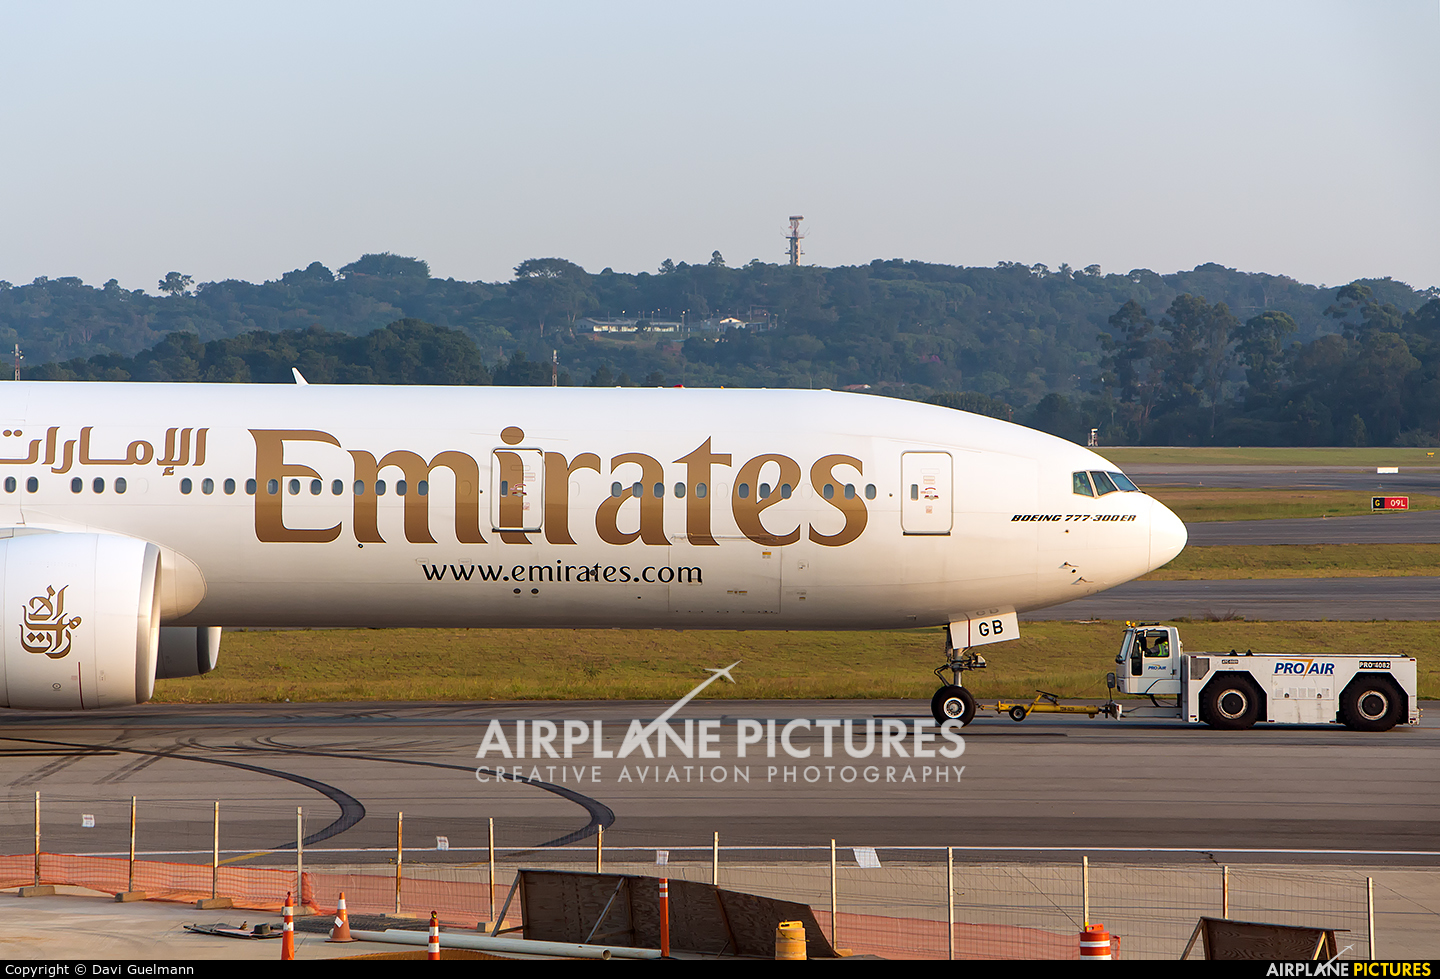 Emirates Airlines A6-EGB aircraft at São Paulo - Guarulhos